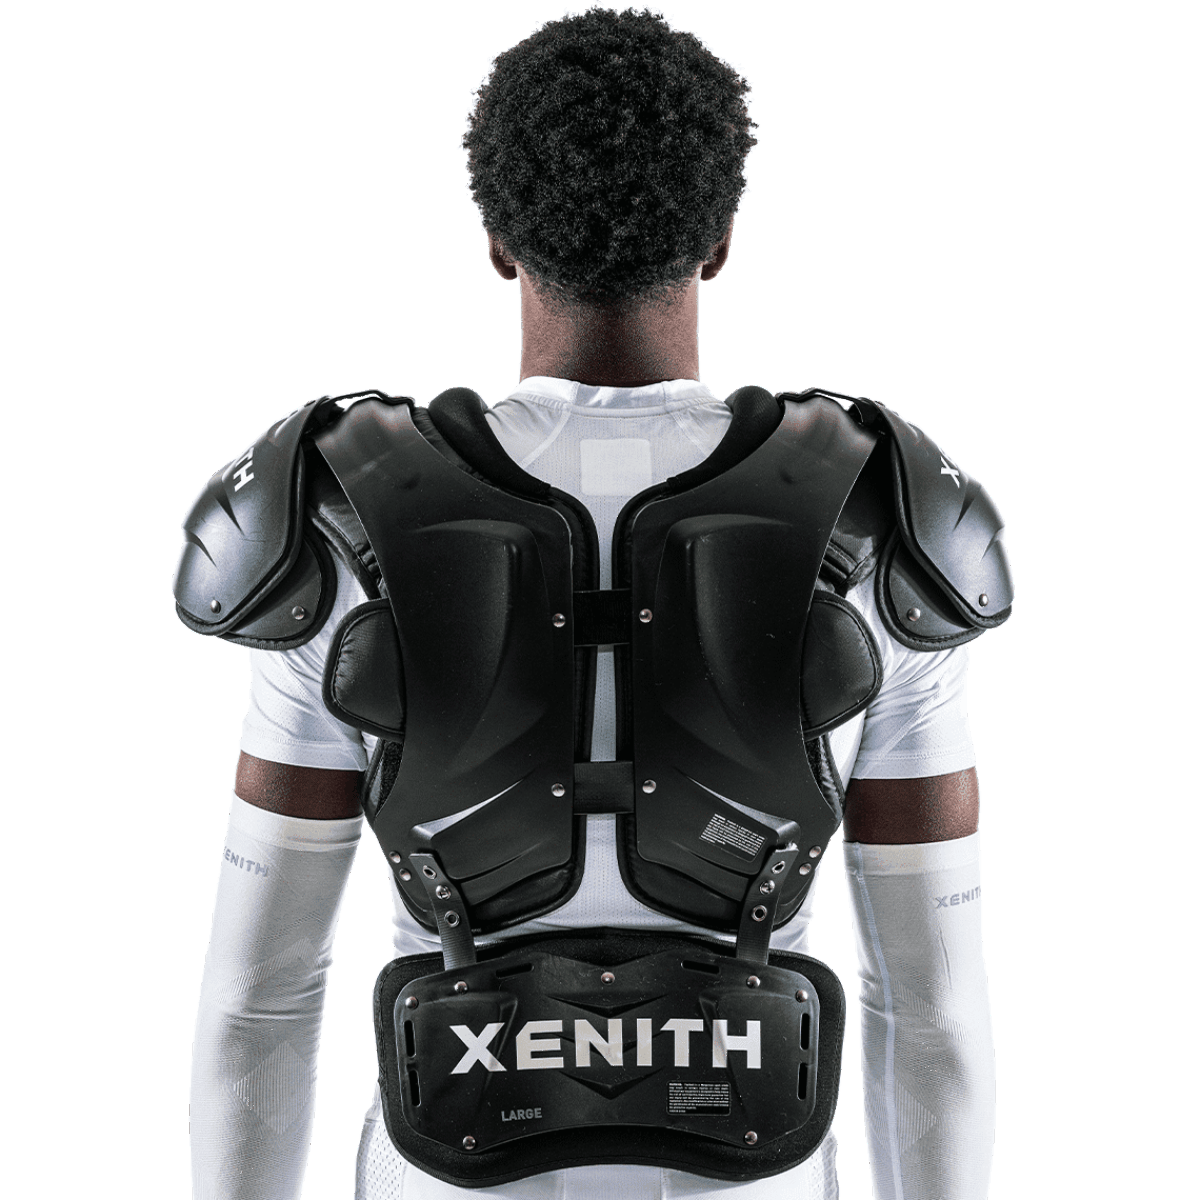 Black Xenith back plate with white Xenith logo.